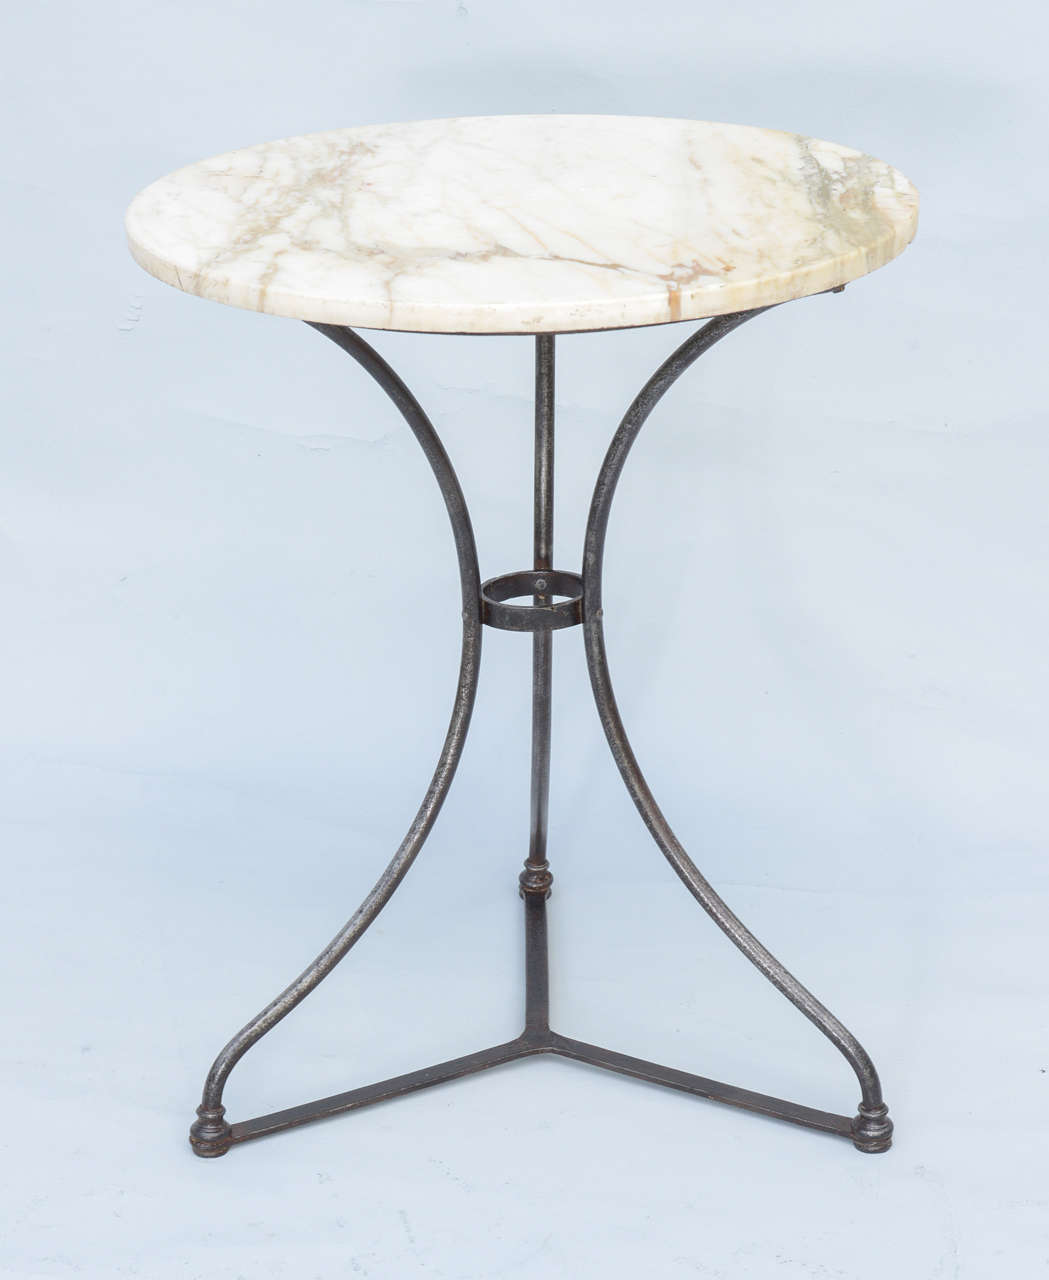 Round bistro table, having white veined marble top, raised on three iron legs connected by a stretcher.